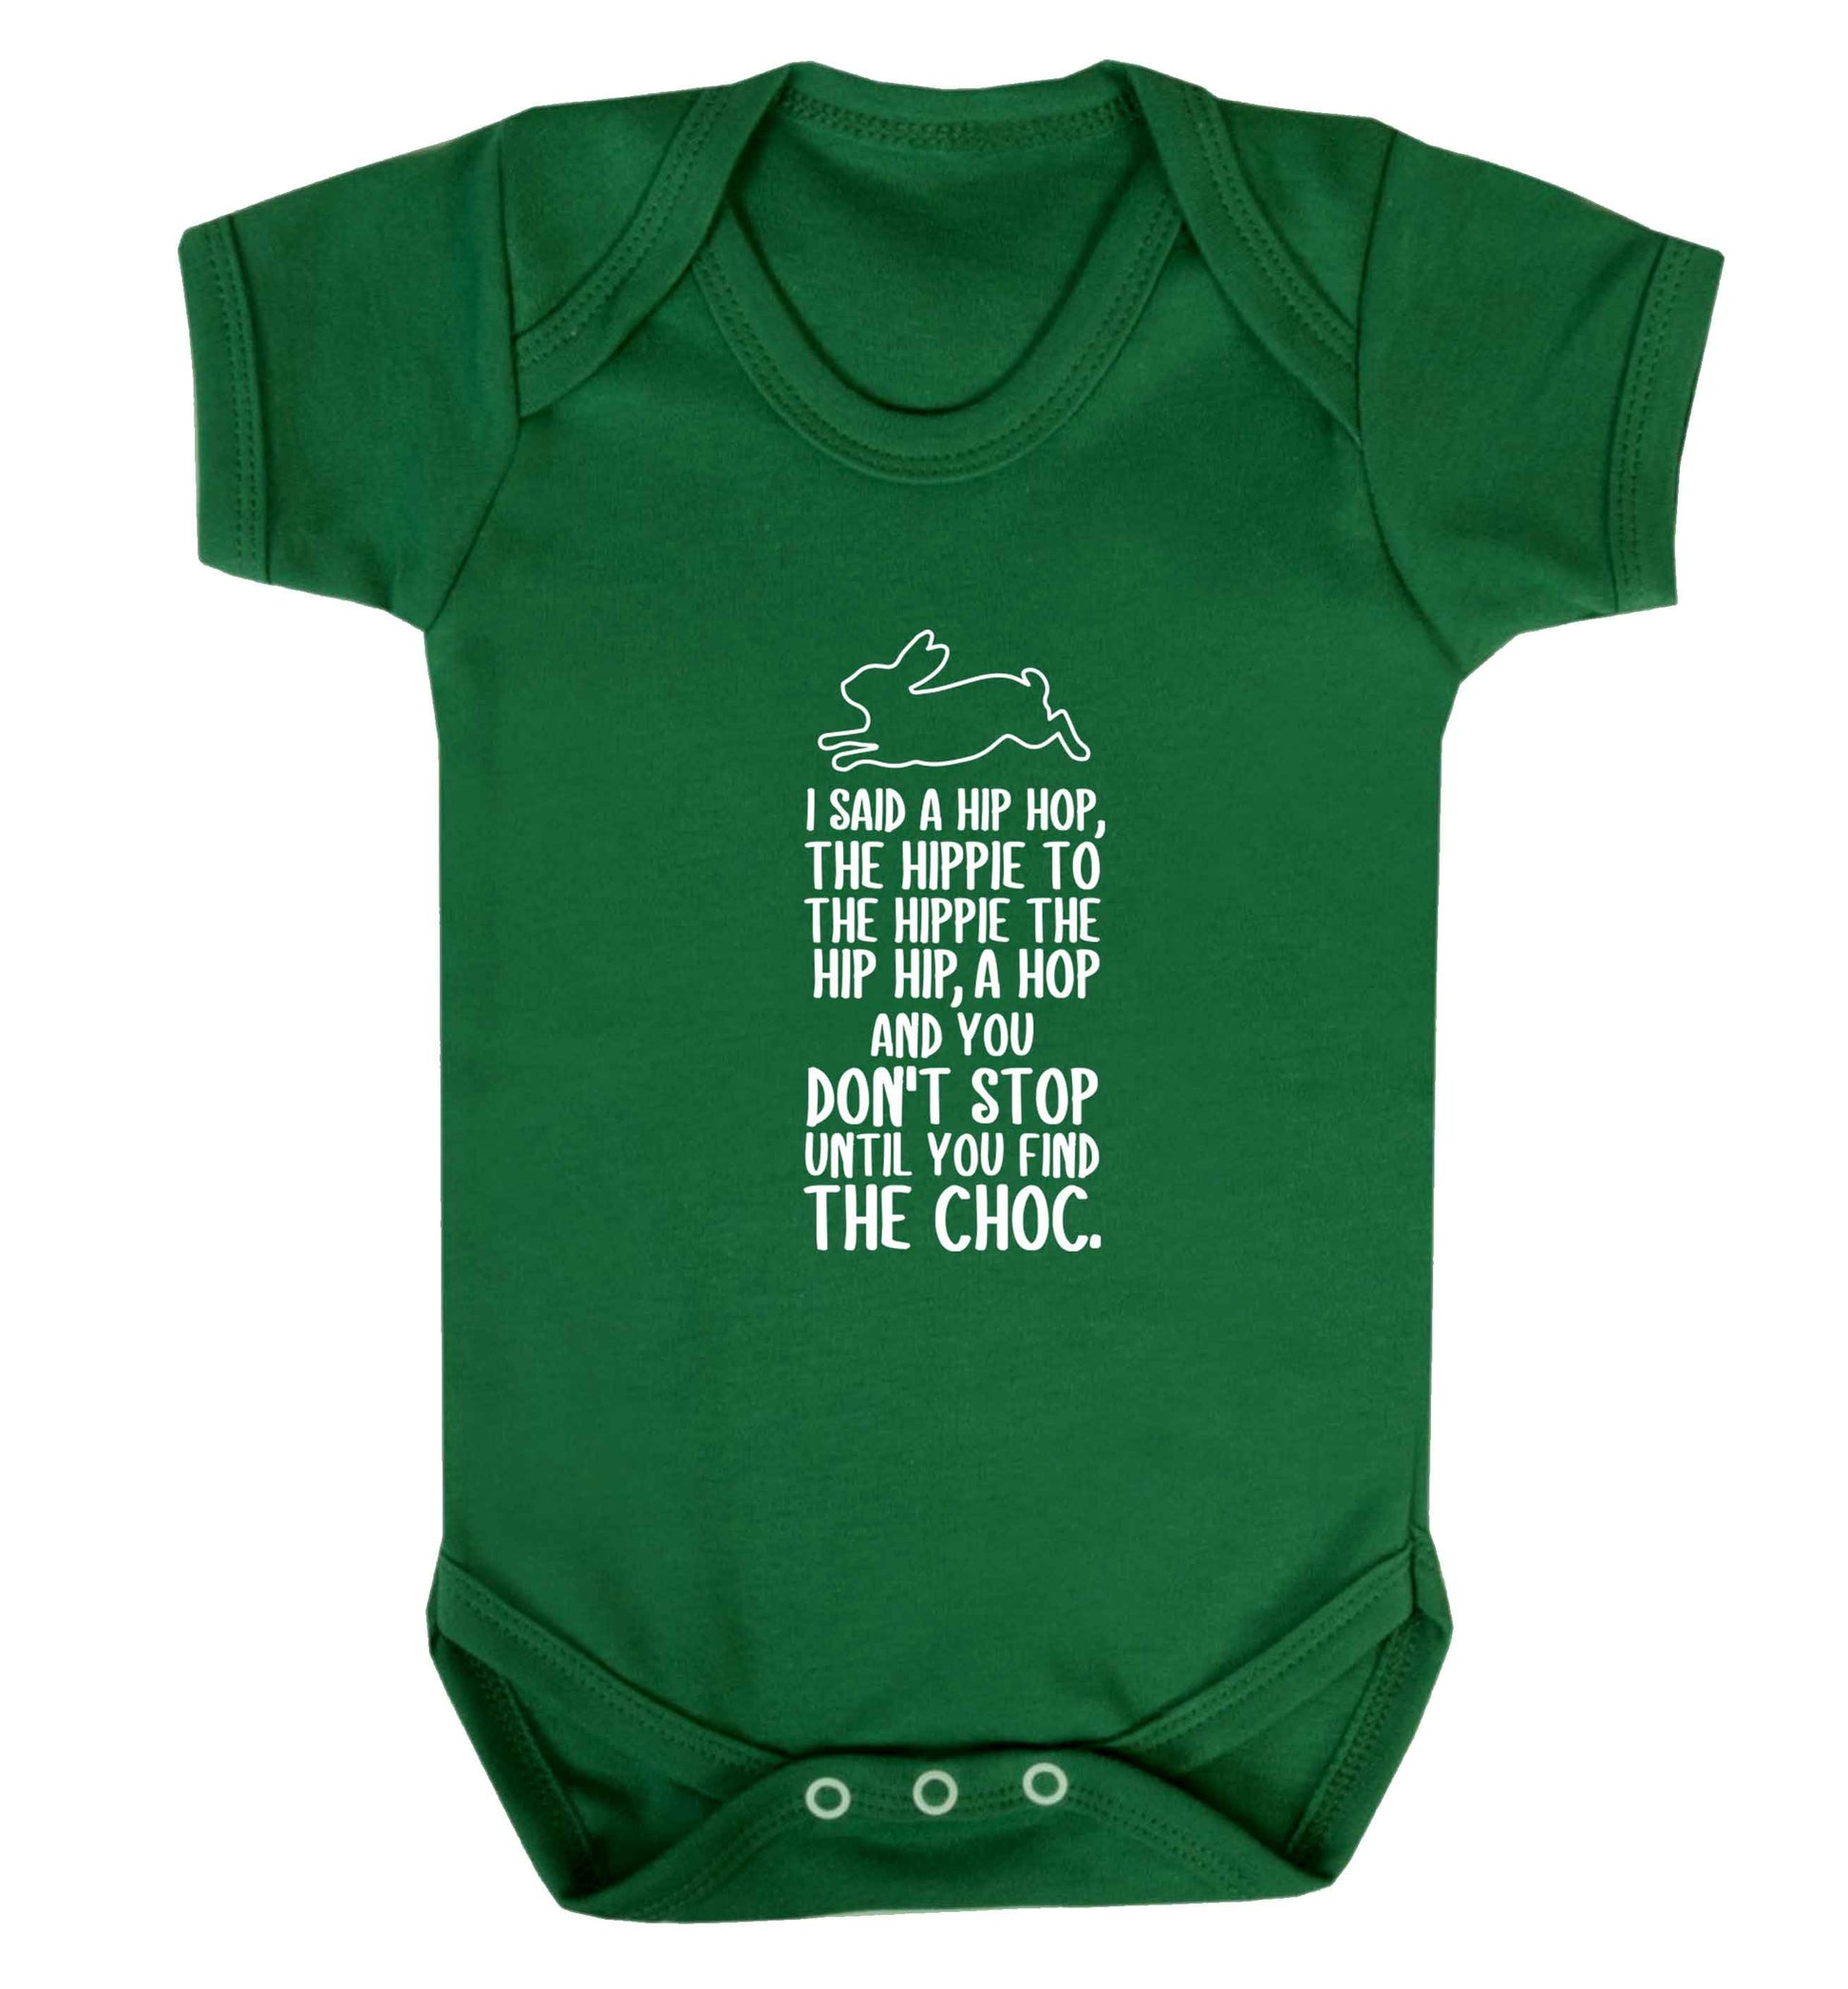 Don't stop until you find the choc baby vest green 18-24 months